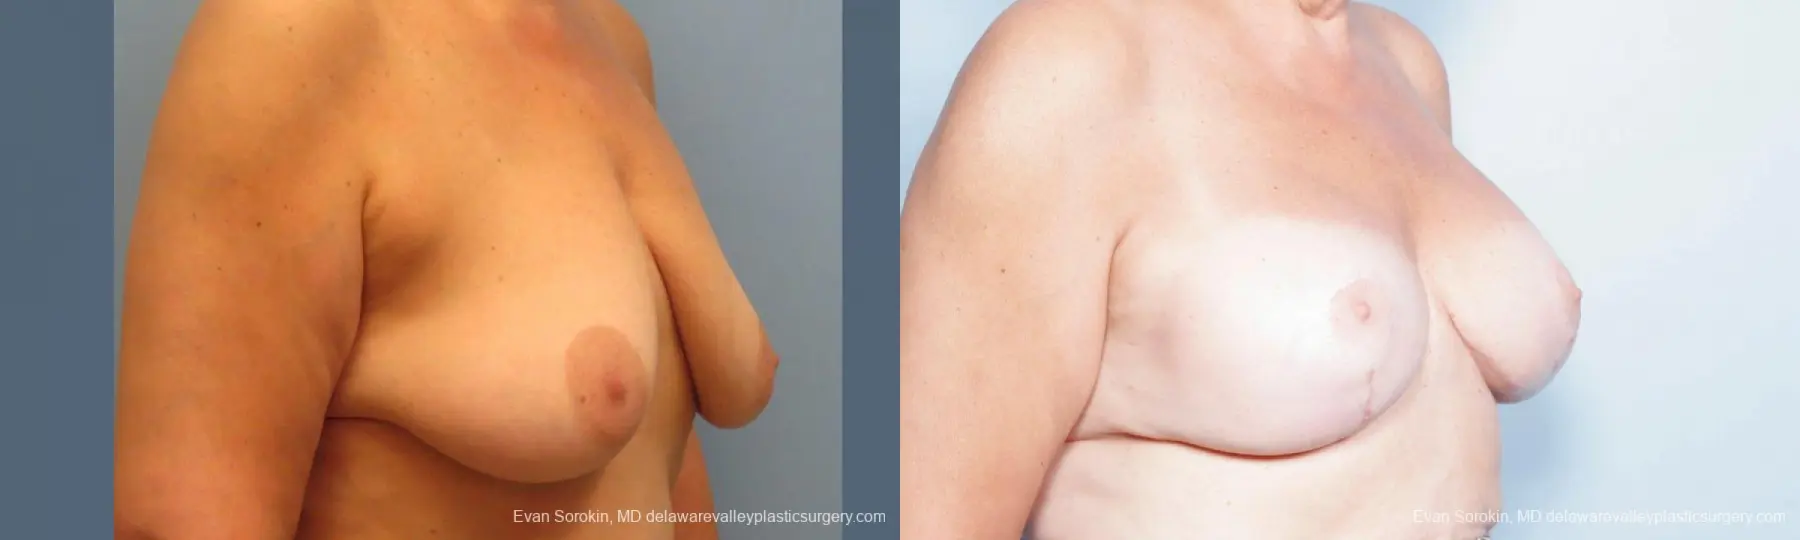 Philadelphia Breast Lift and Augmentation 9431 - Before and After 2